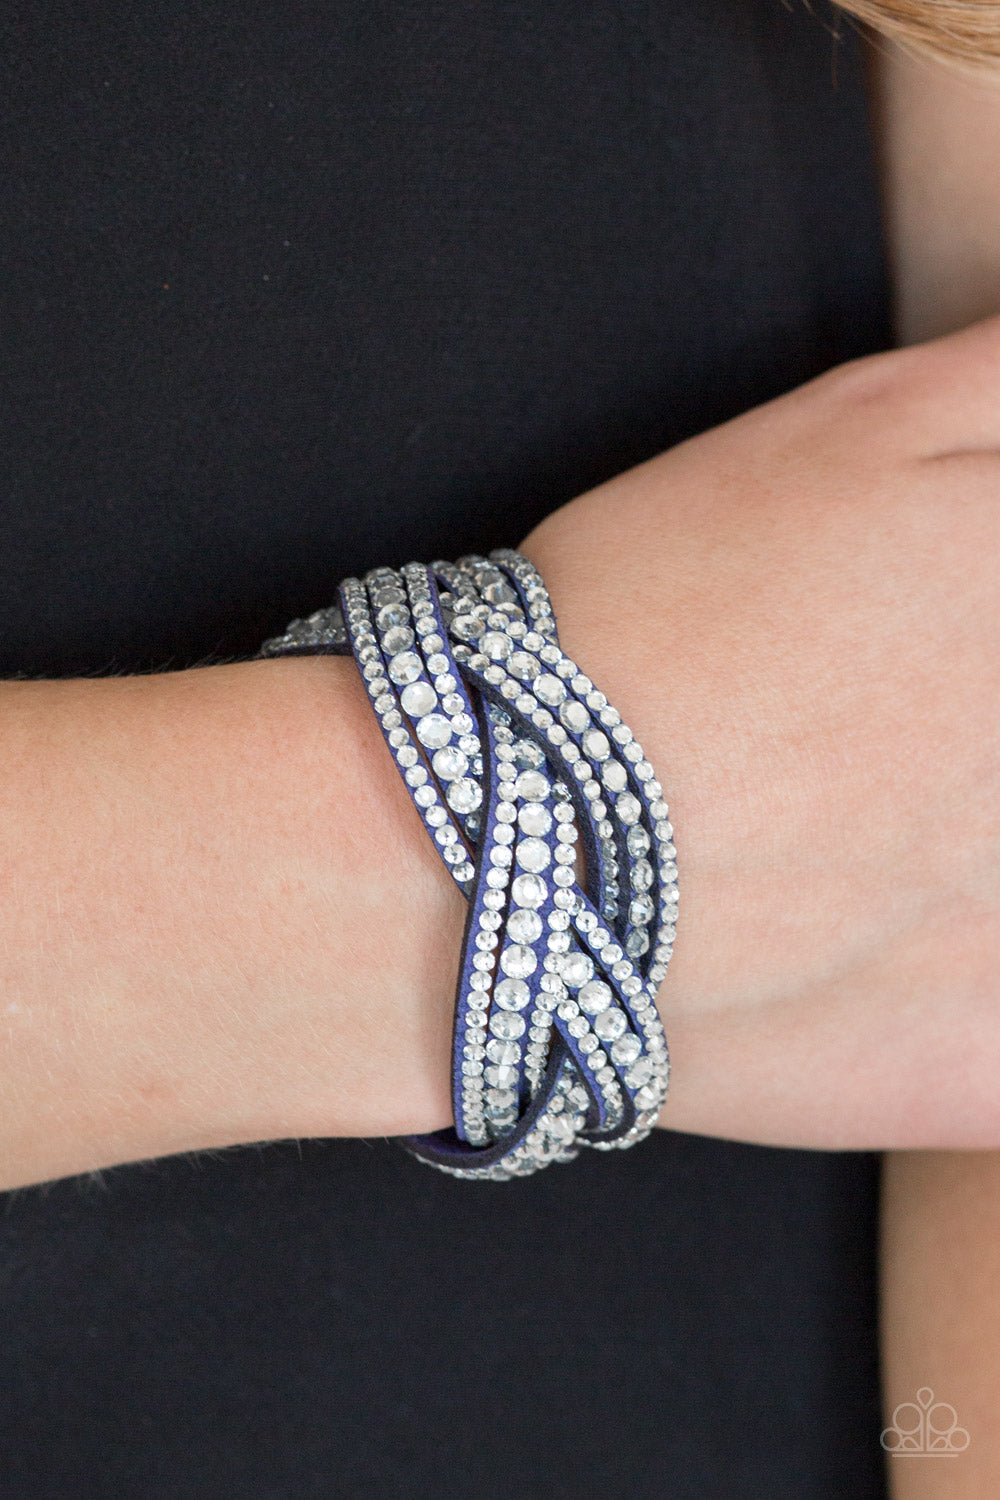 Bring On The Bling - Blue Bracelet - Paparazzi Accessories